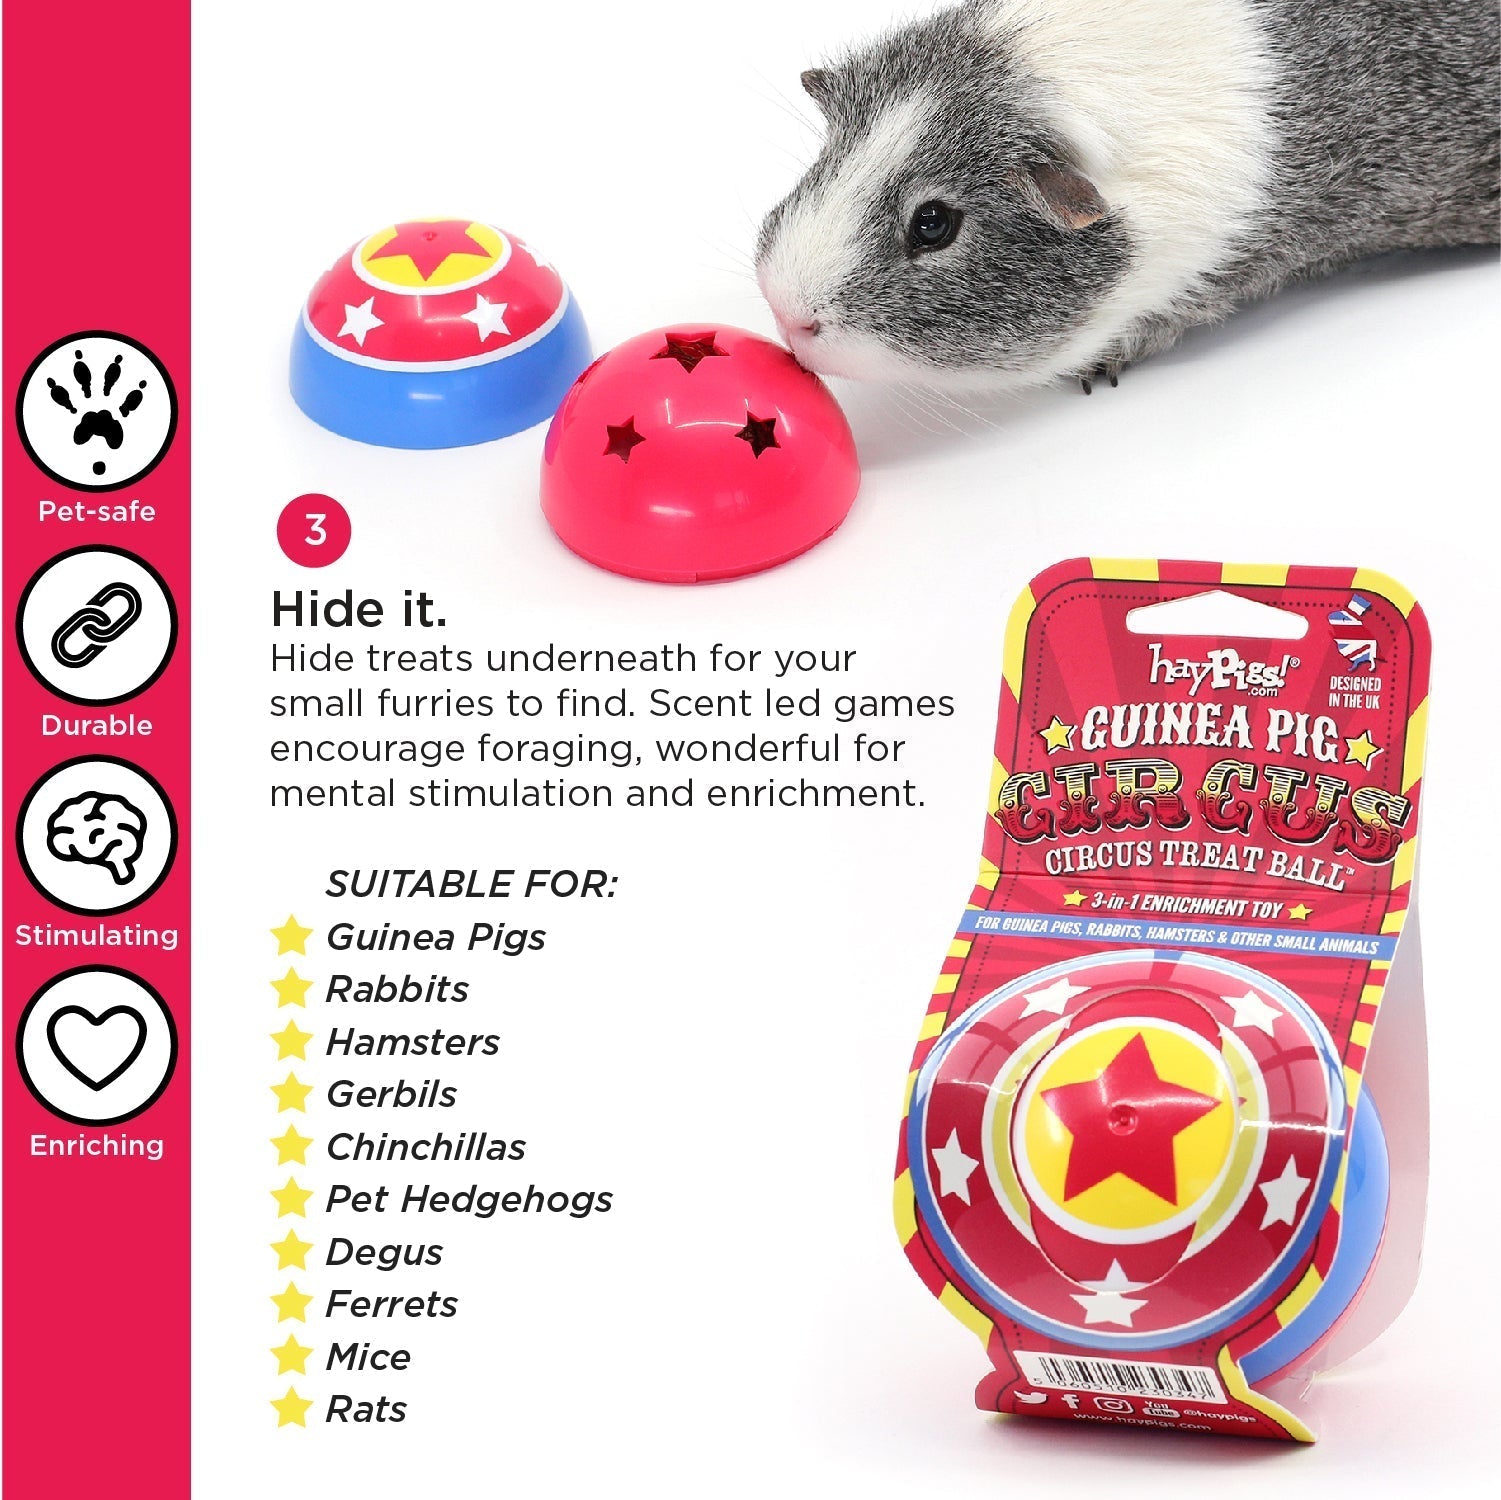 HayPigs! Circus Treat Ball 3-in-1 Enrichment Toy